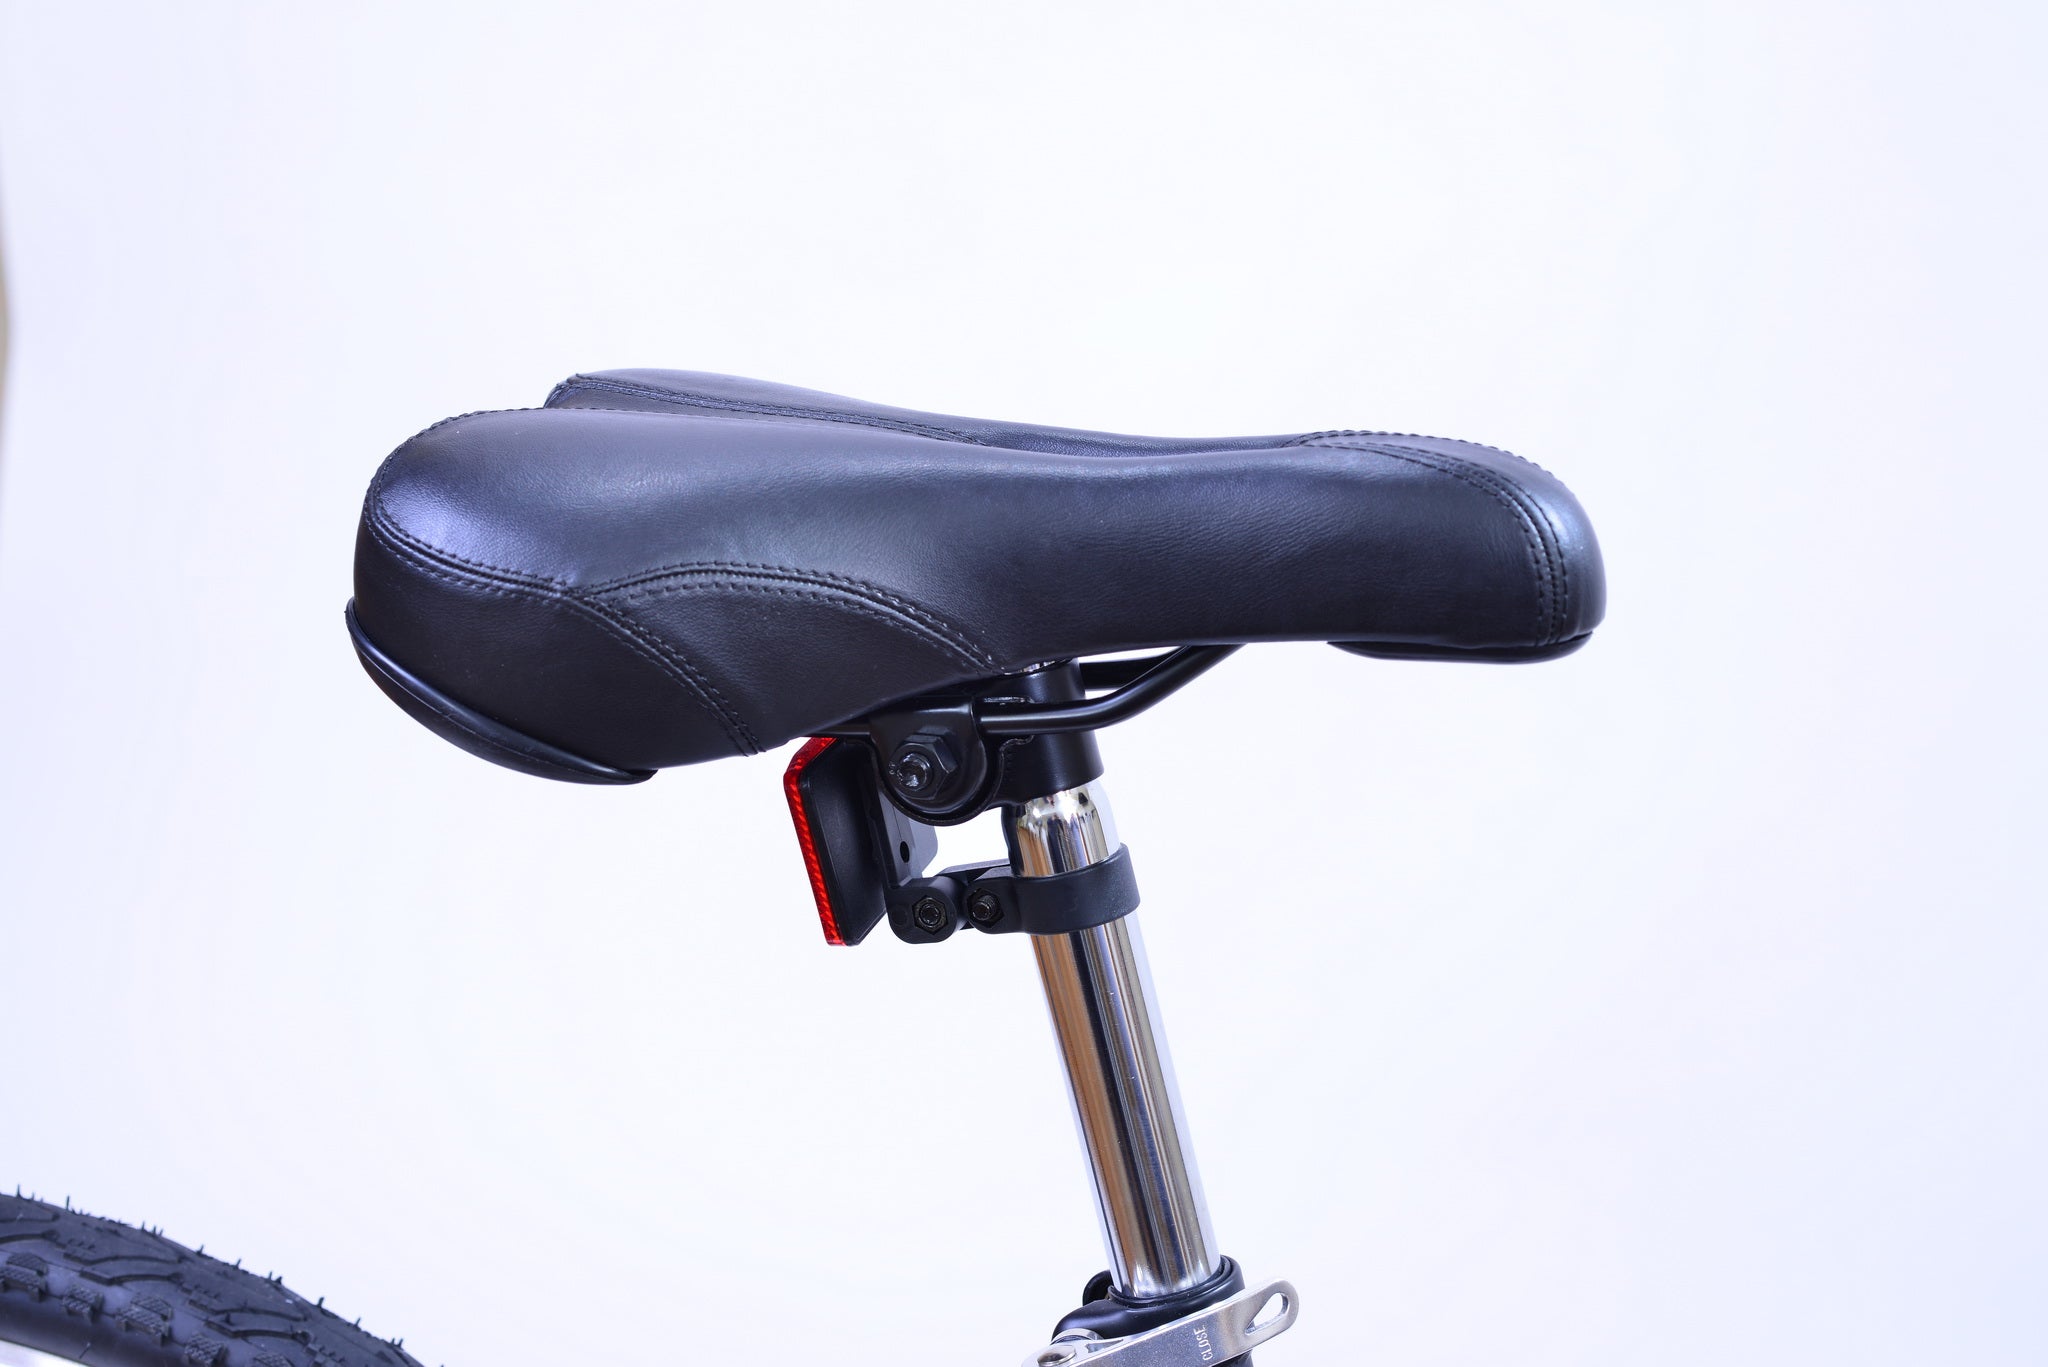 Black bike saddle on a silver seat post and with a red reflector in the back.